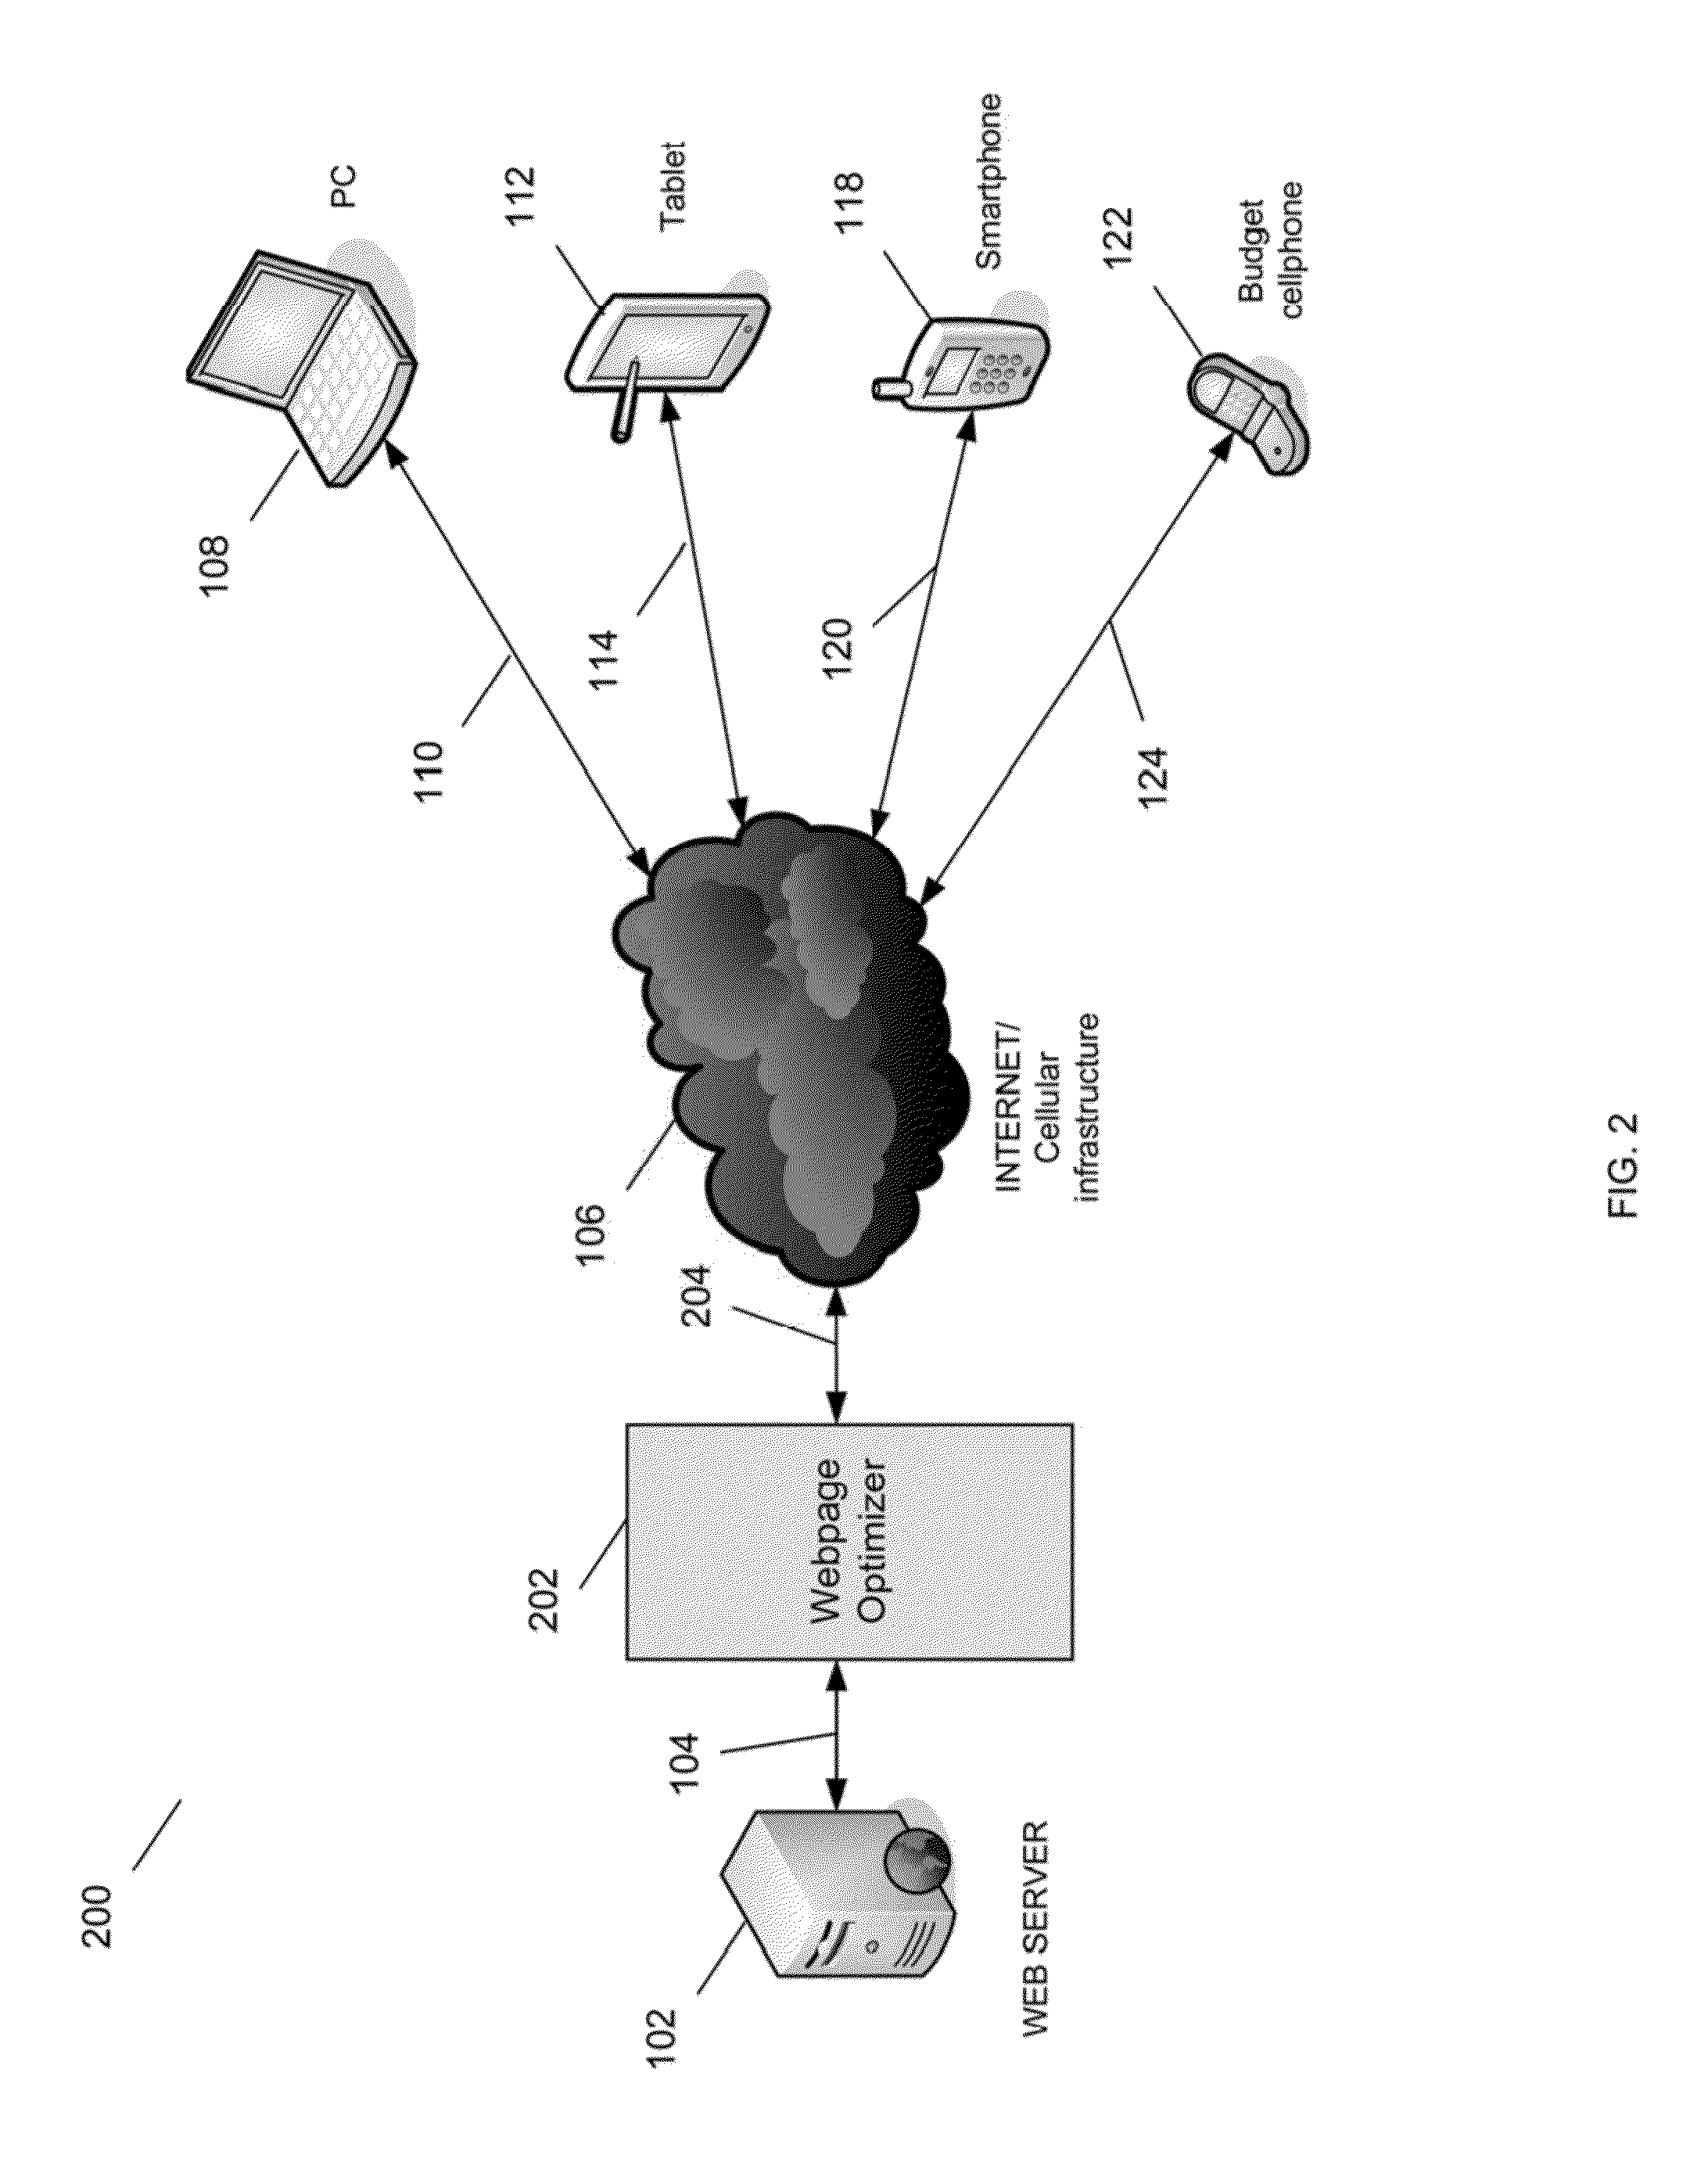 System and method for logical chunking and restructuring websites